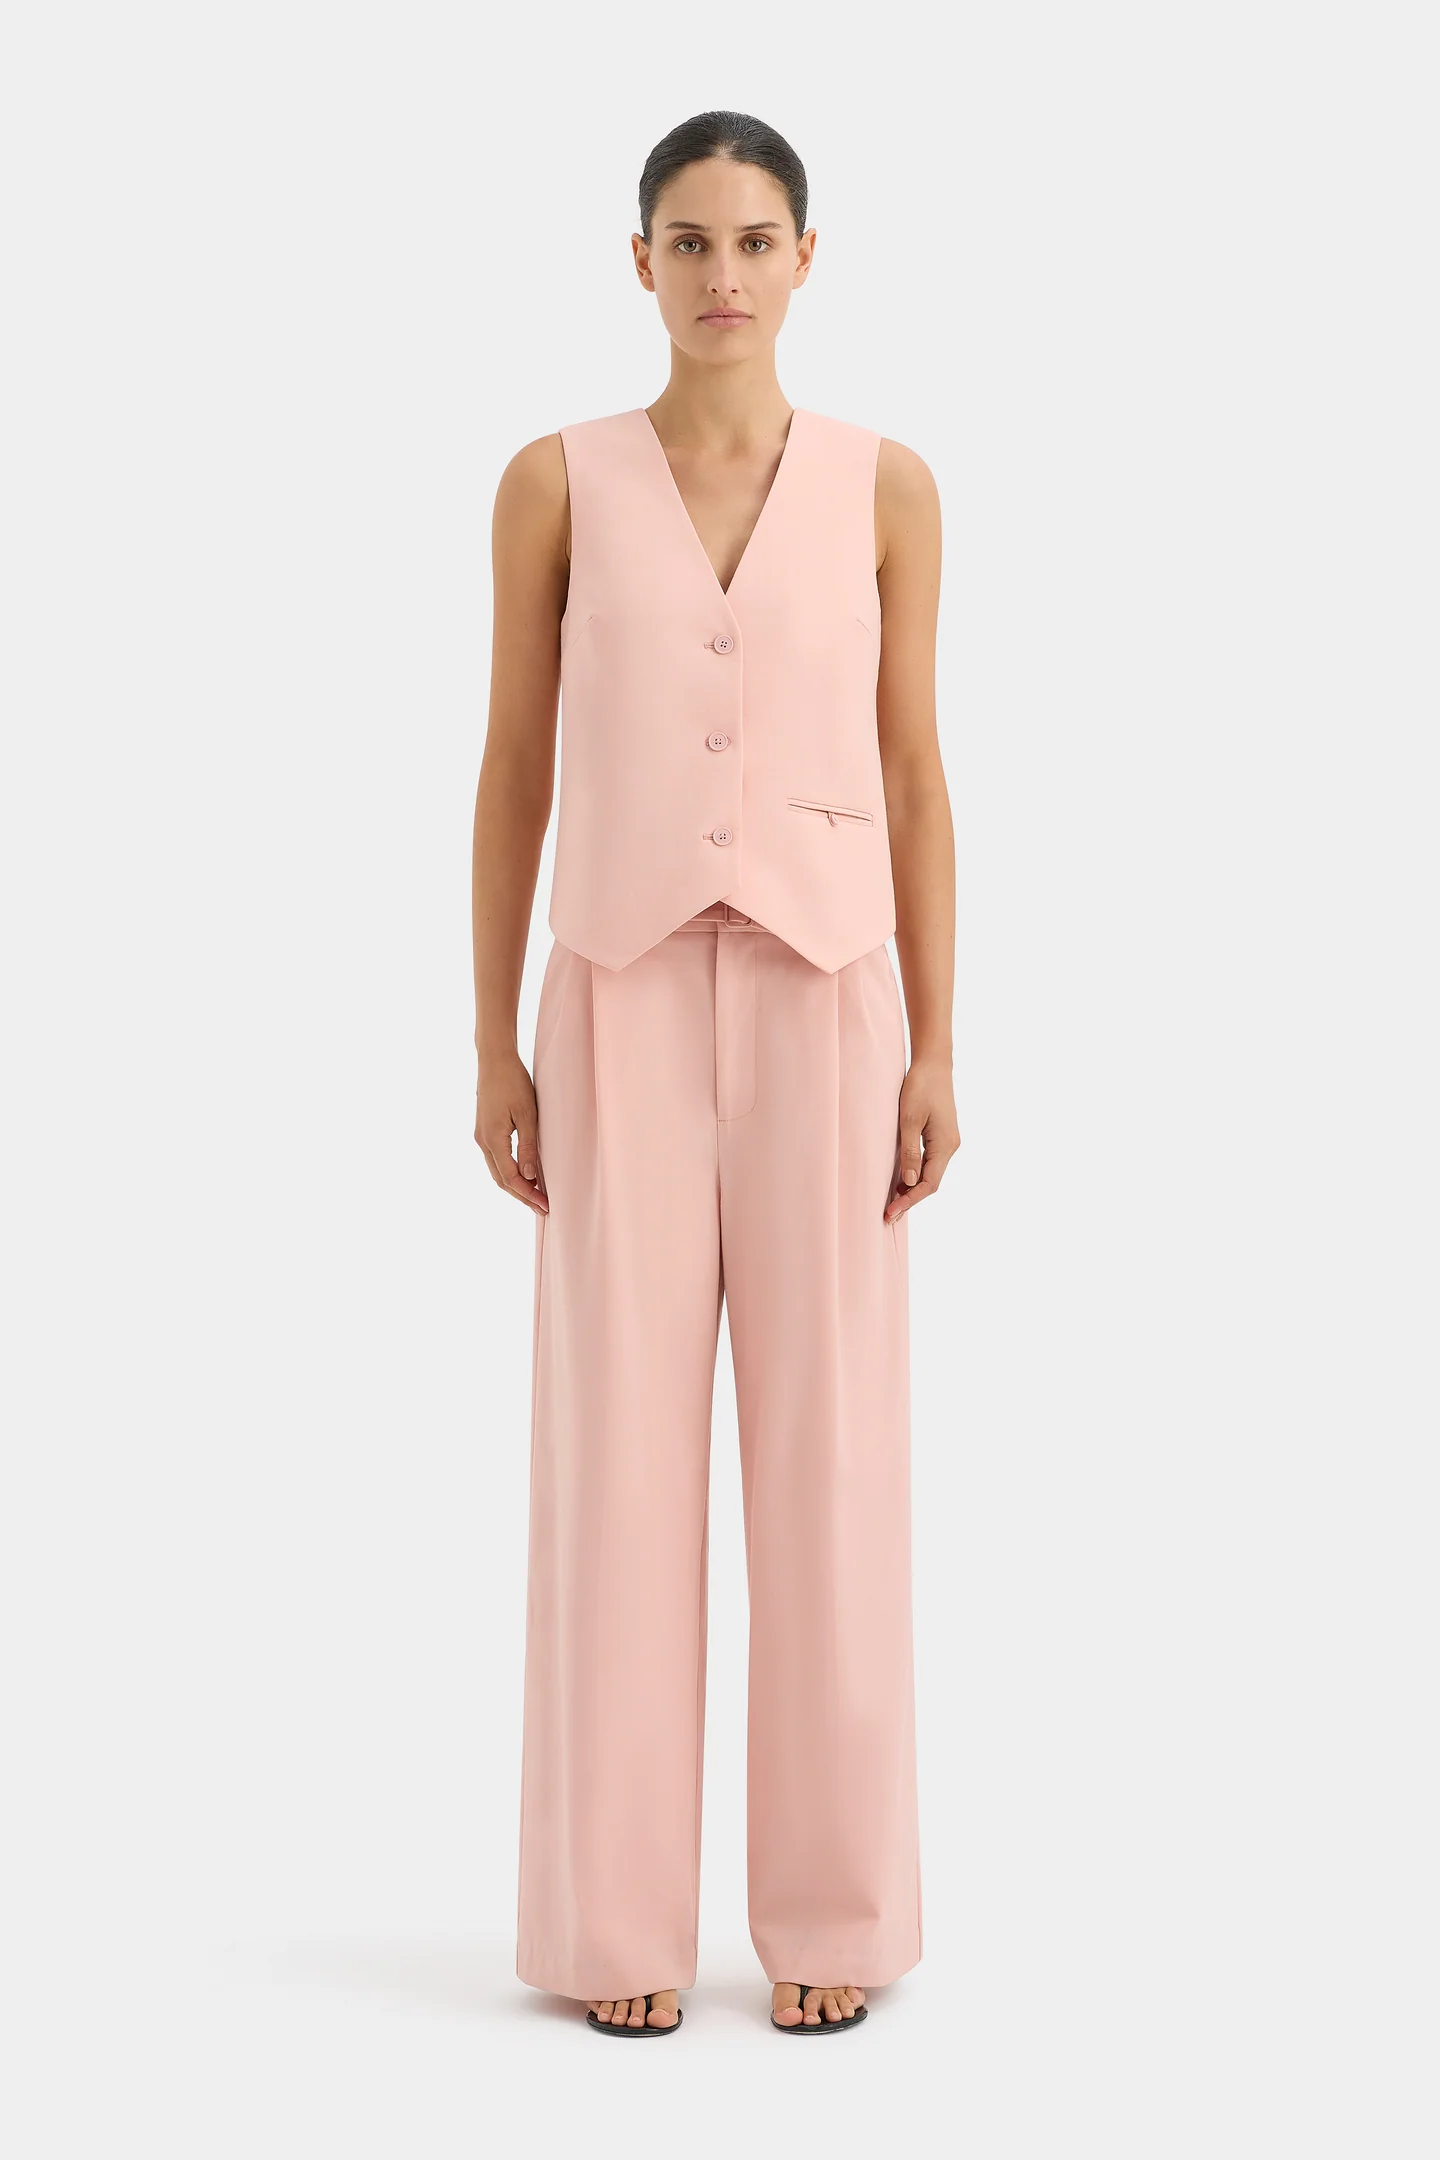 SIR. Dario Trouser in Pink available at The New Trend.